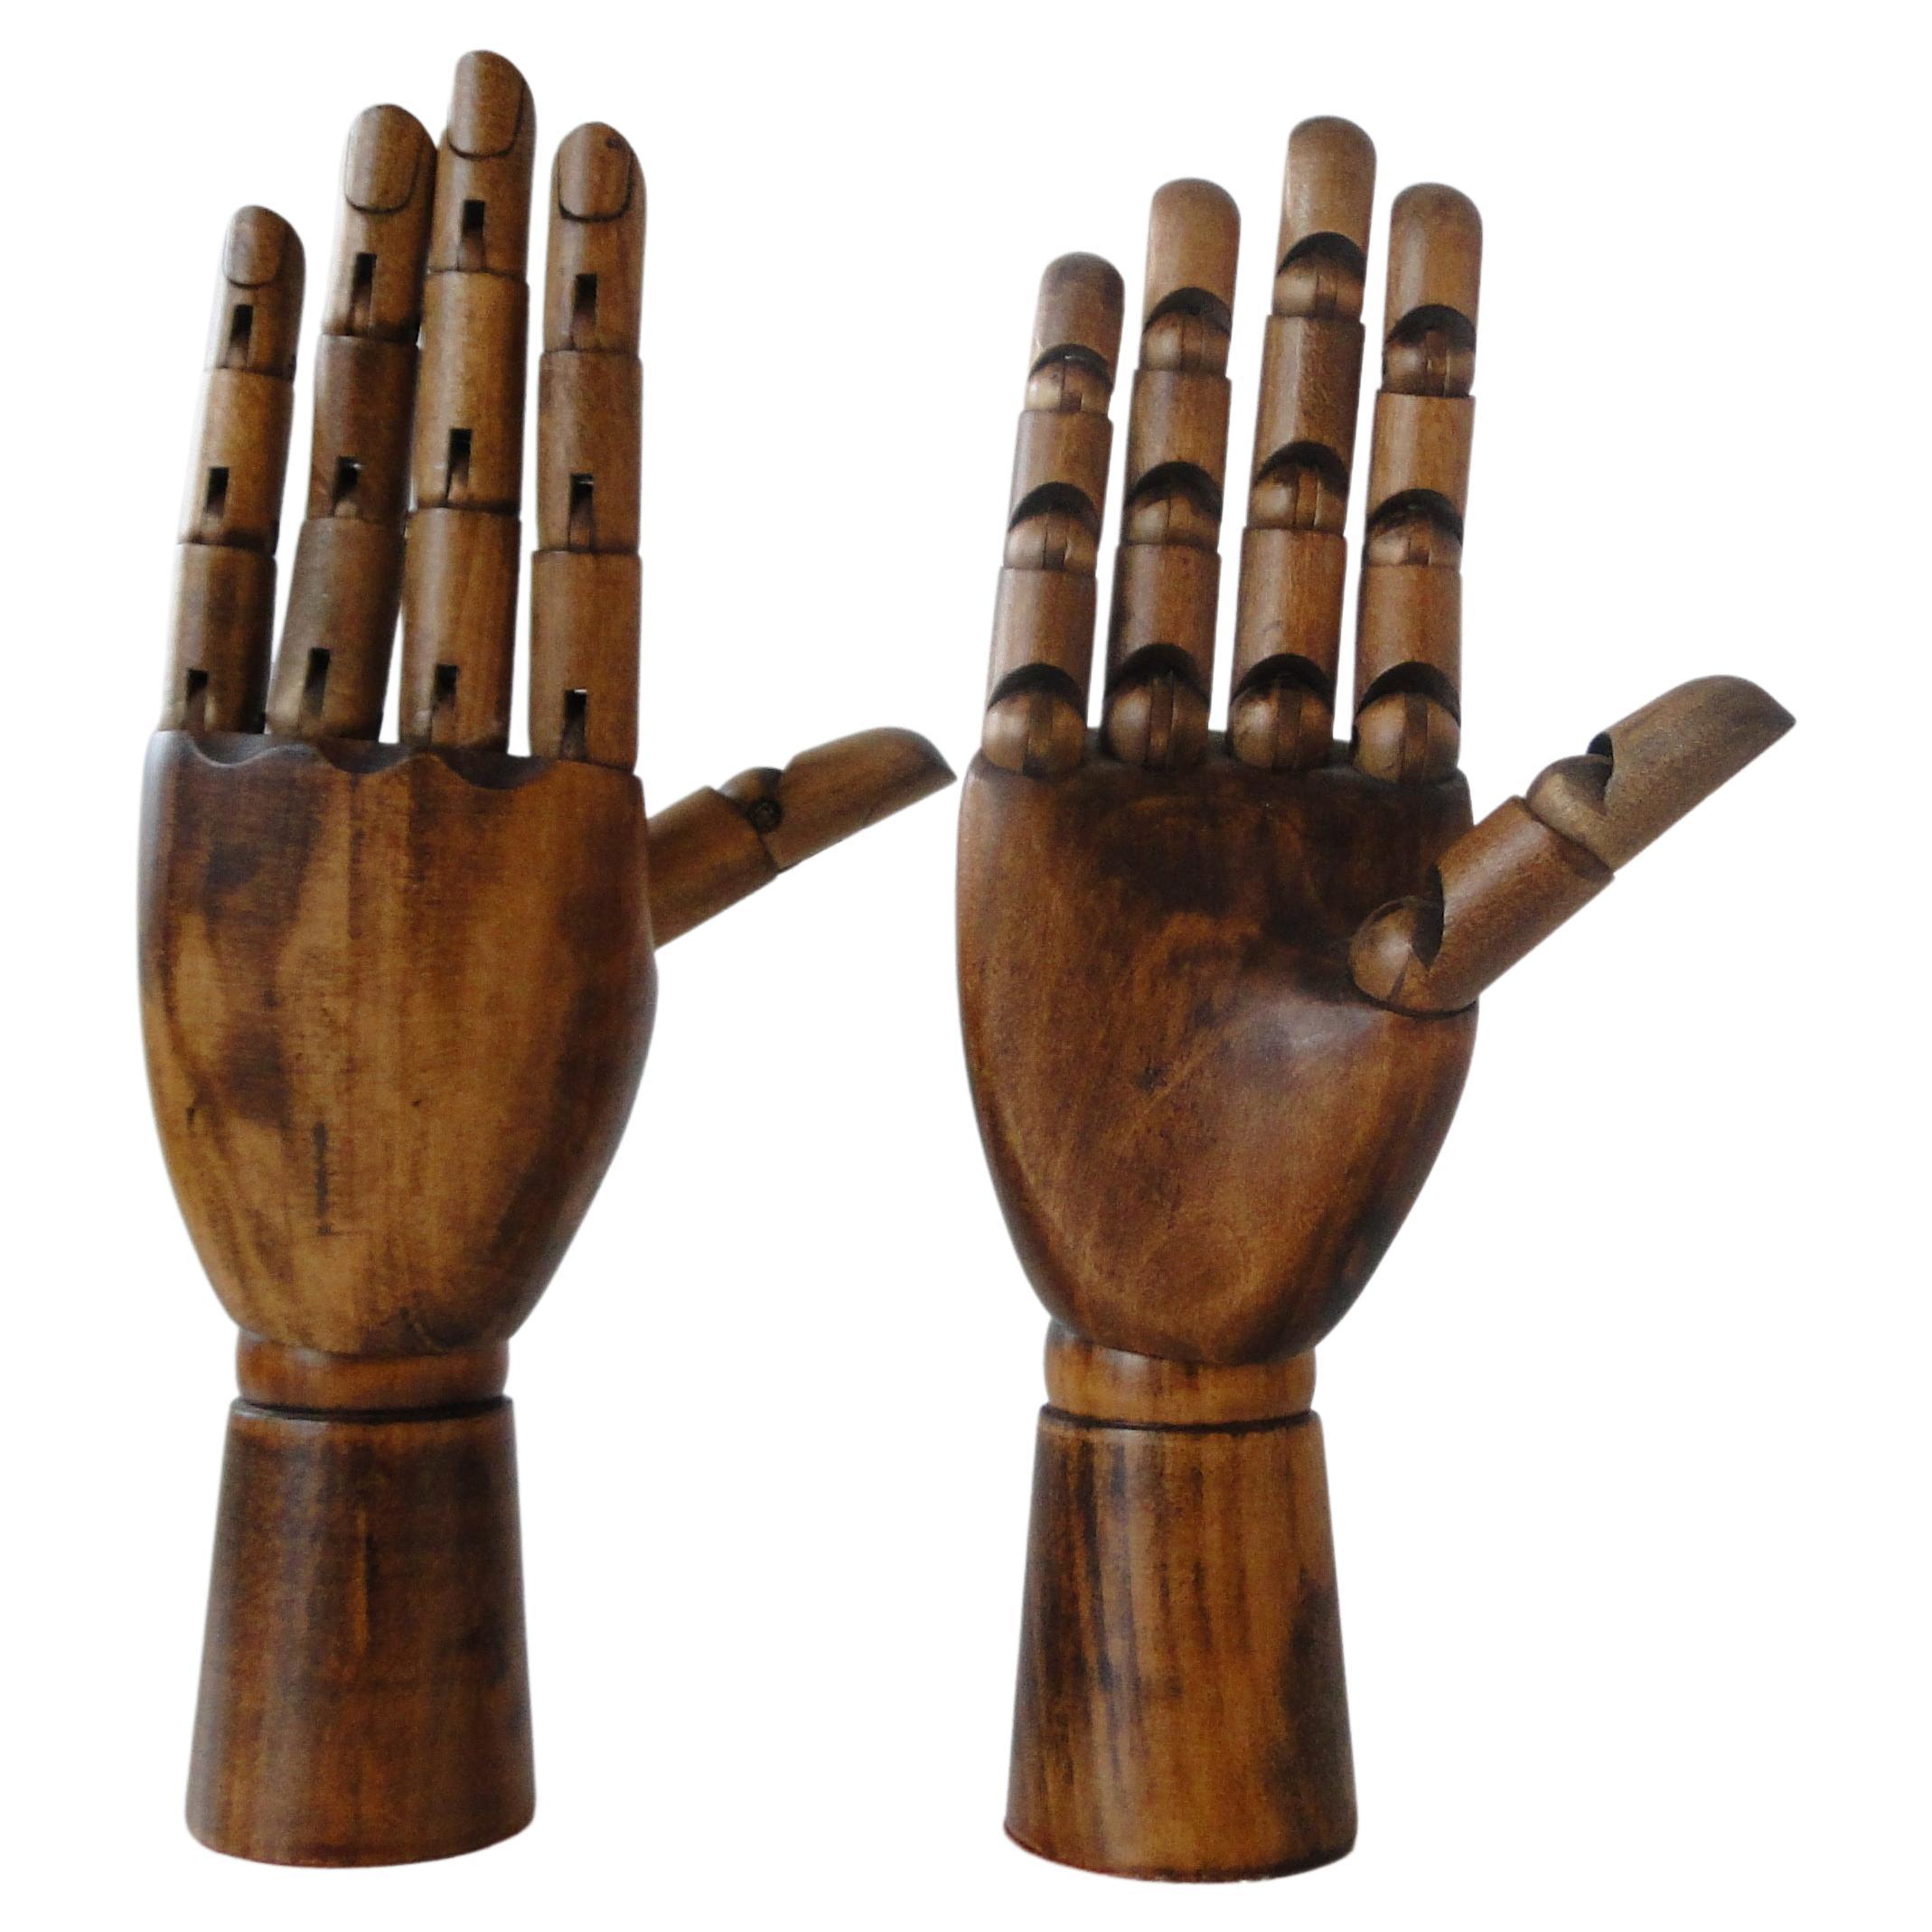 Pair of articulated wooden hands